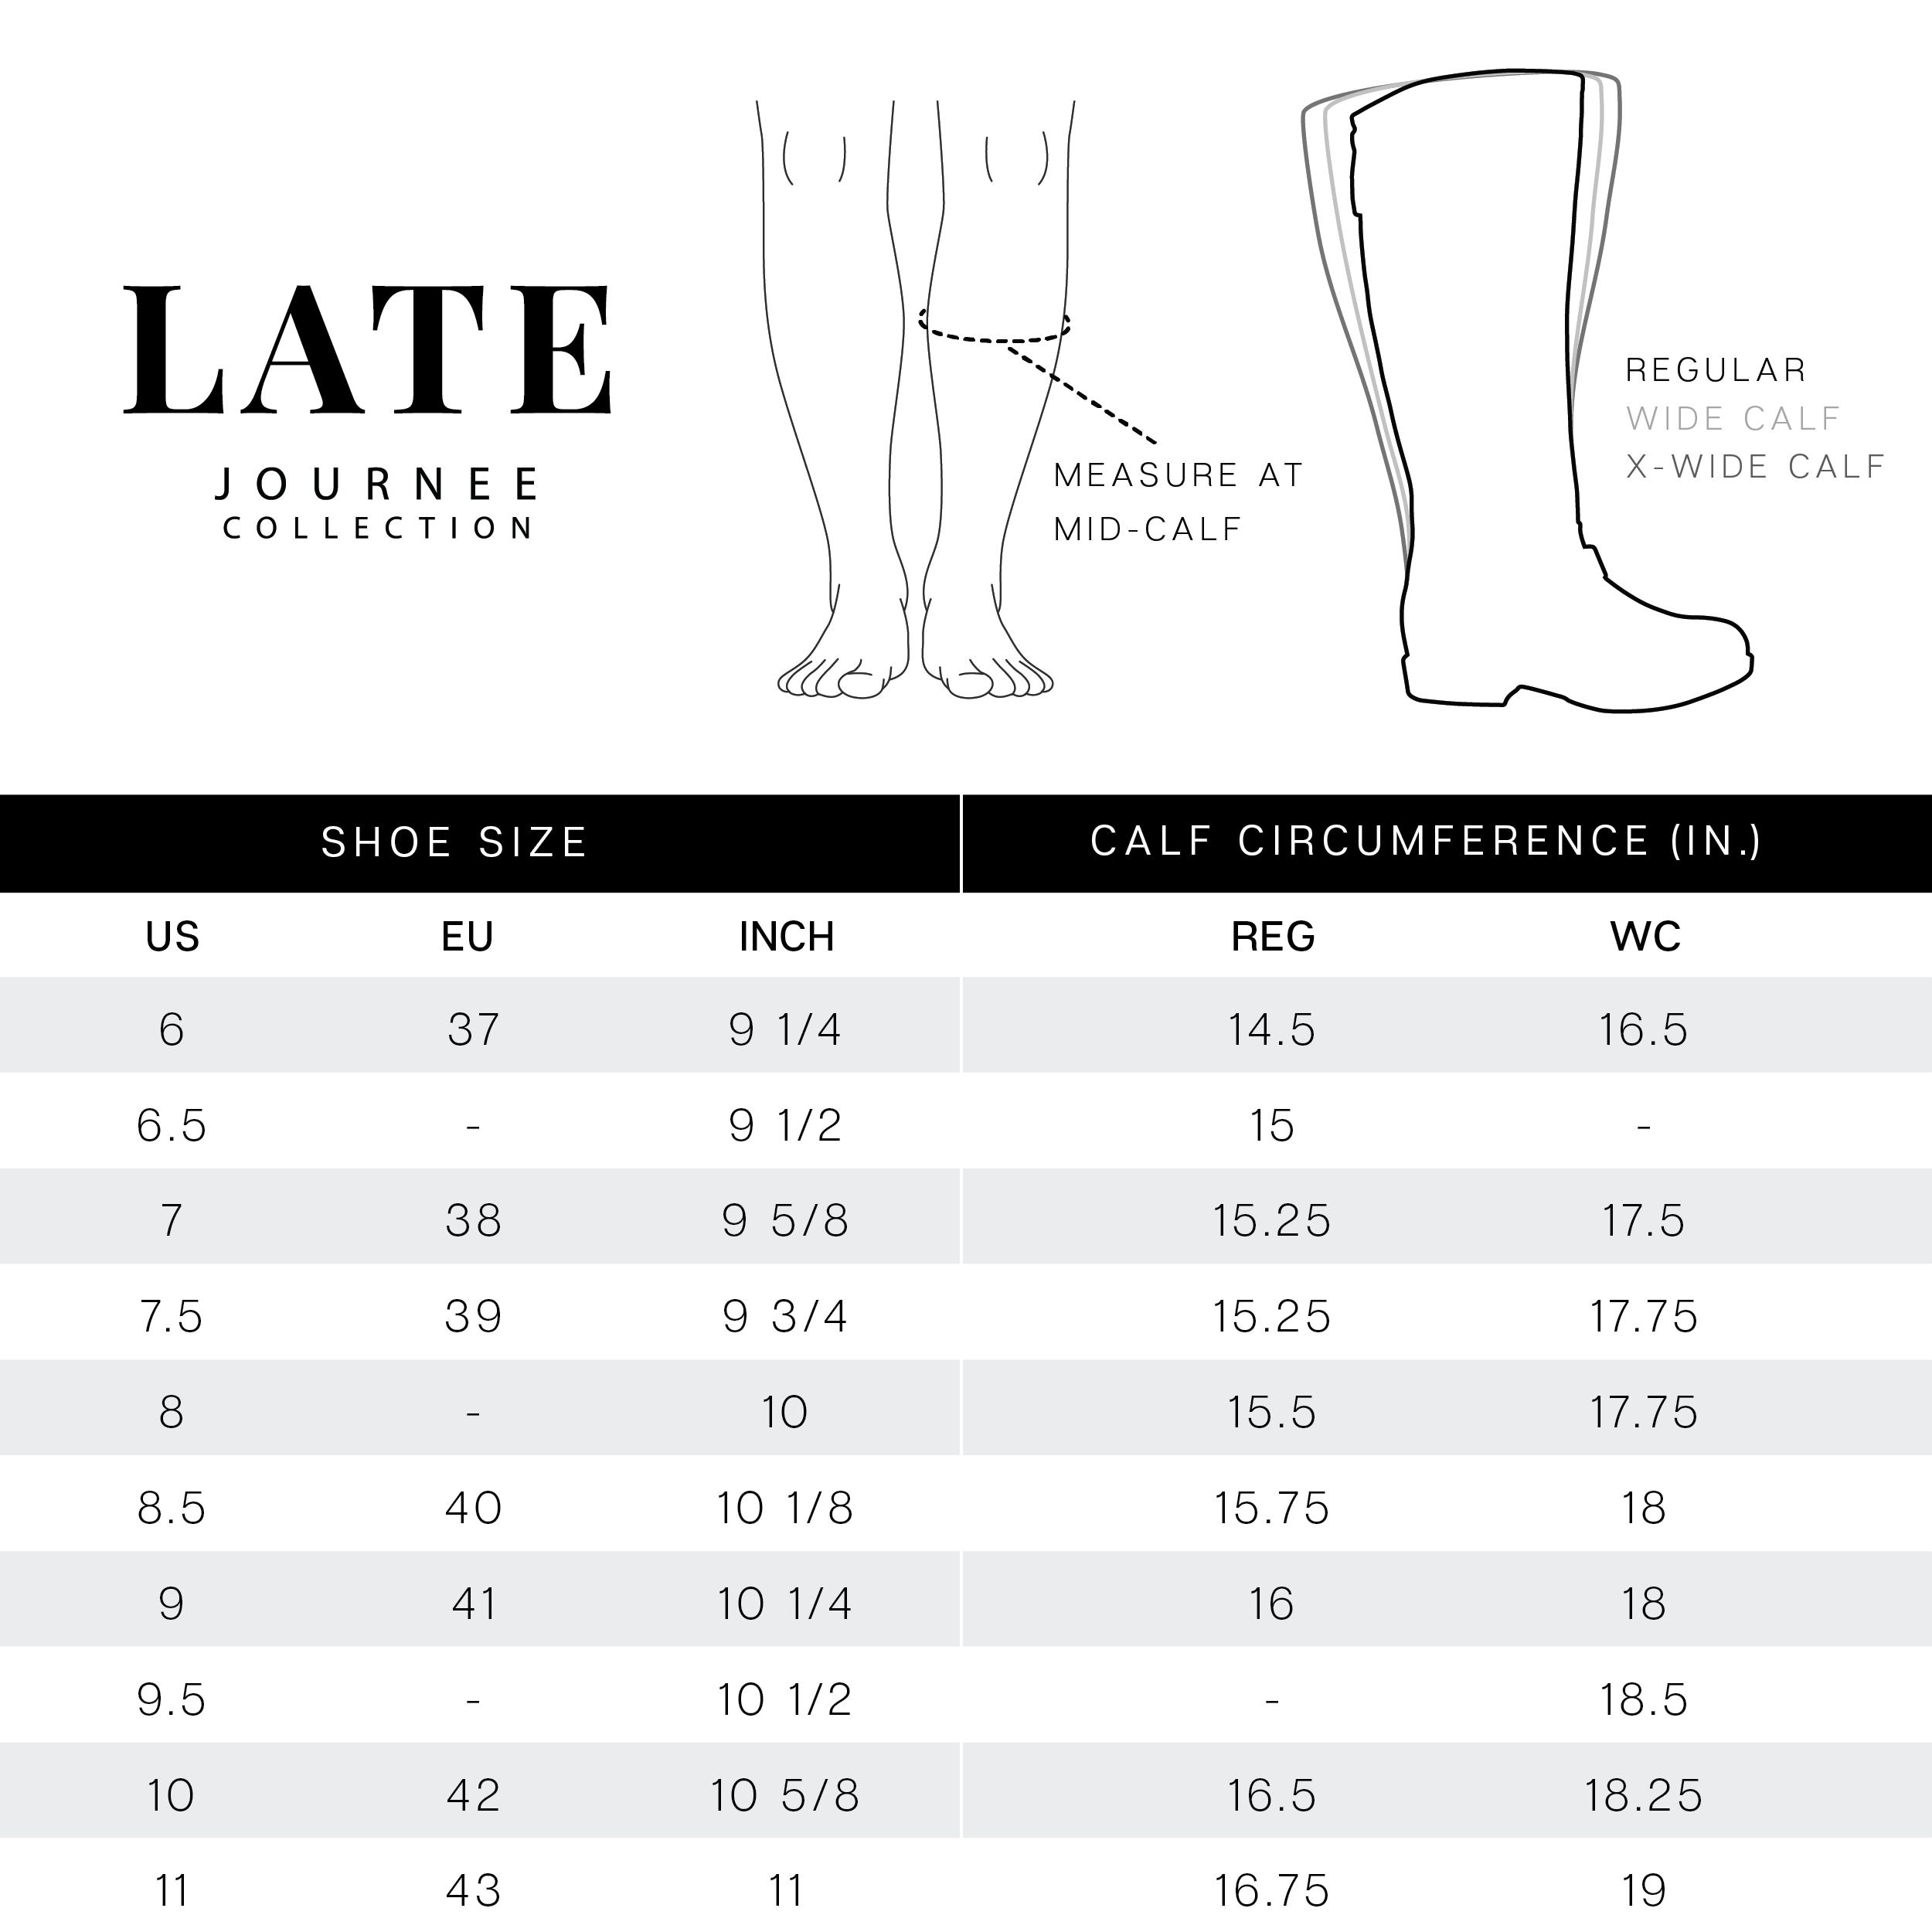 LATE WIDE CALF - Journee Collection